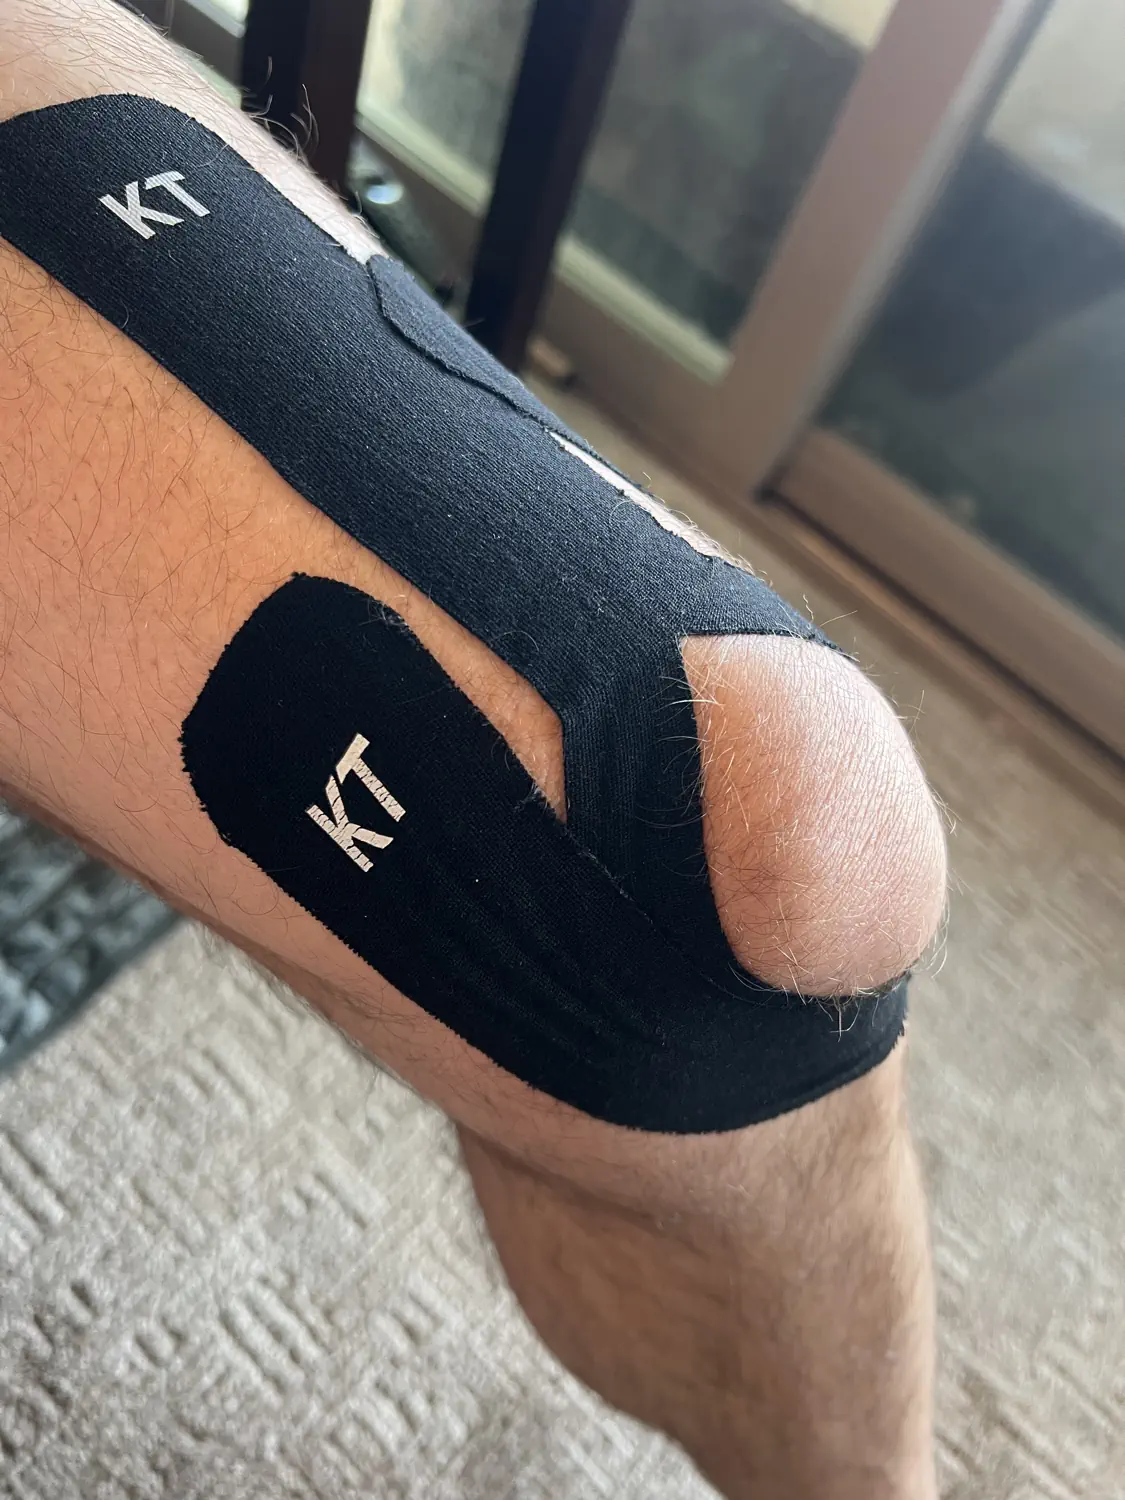 Keith has applied KT Tape to his knee to help aid the recovery process